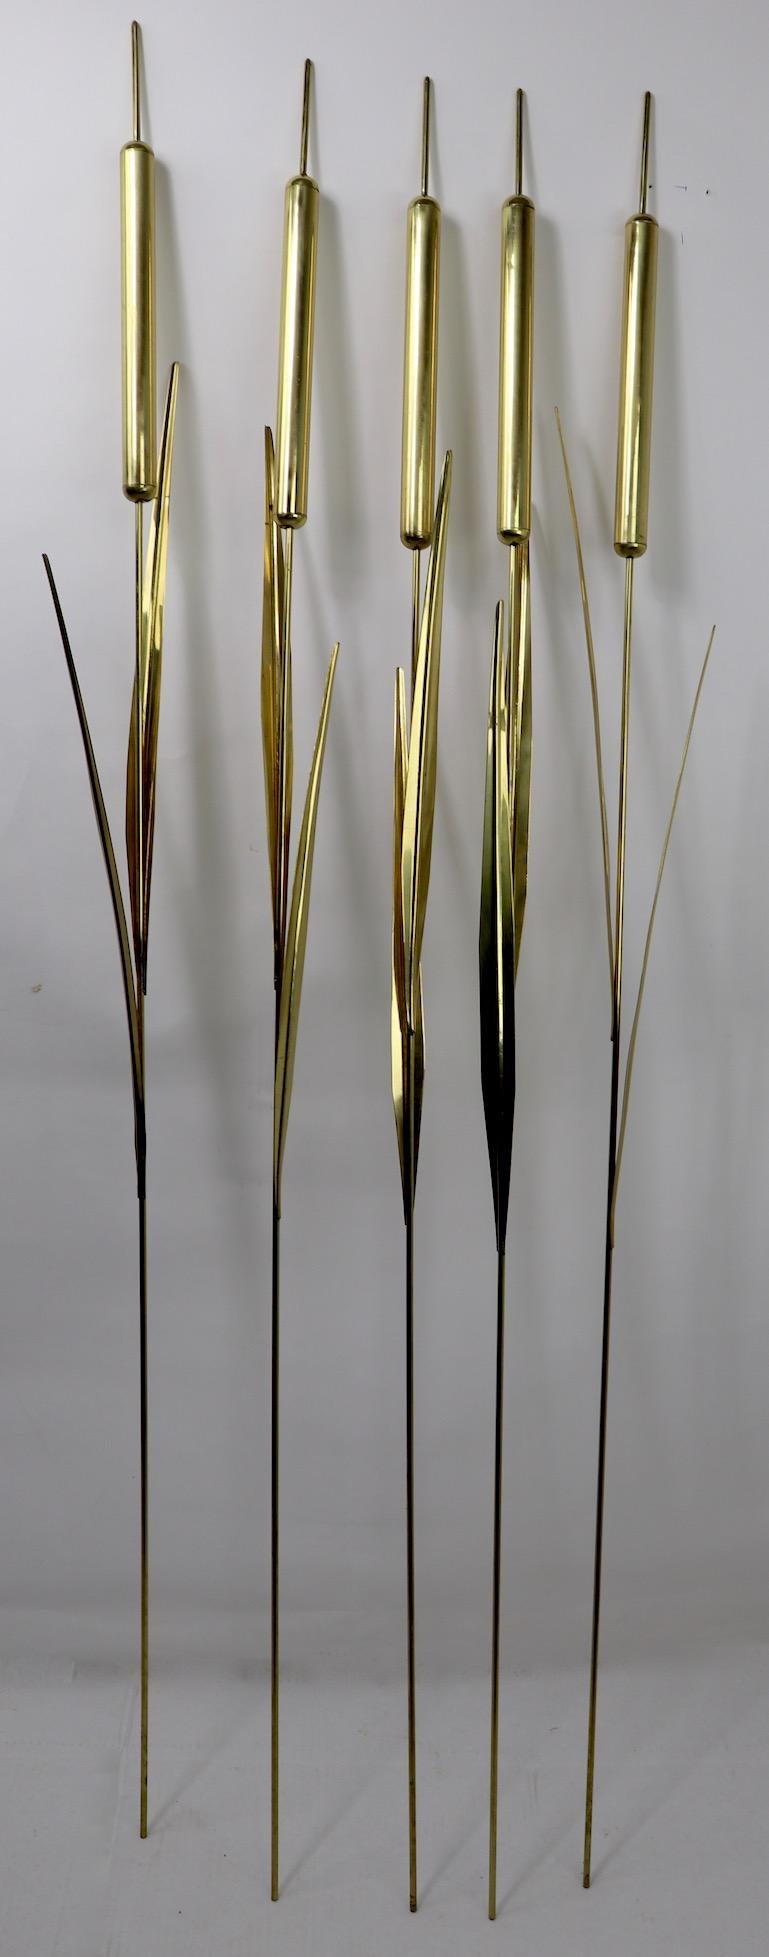 5 large brass cattails attributed to Curtis Jere. Brass cattail element 1 inch diameter offered and priced individually, but we would love to see hem stay together.